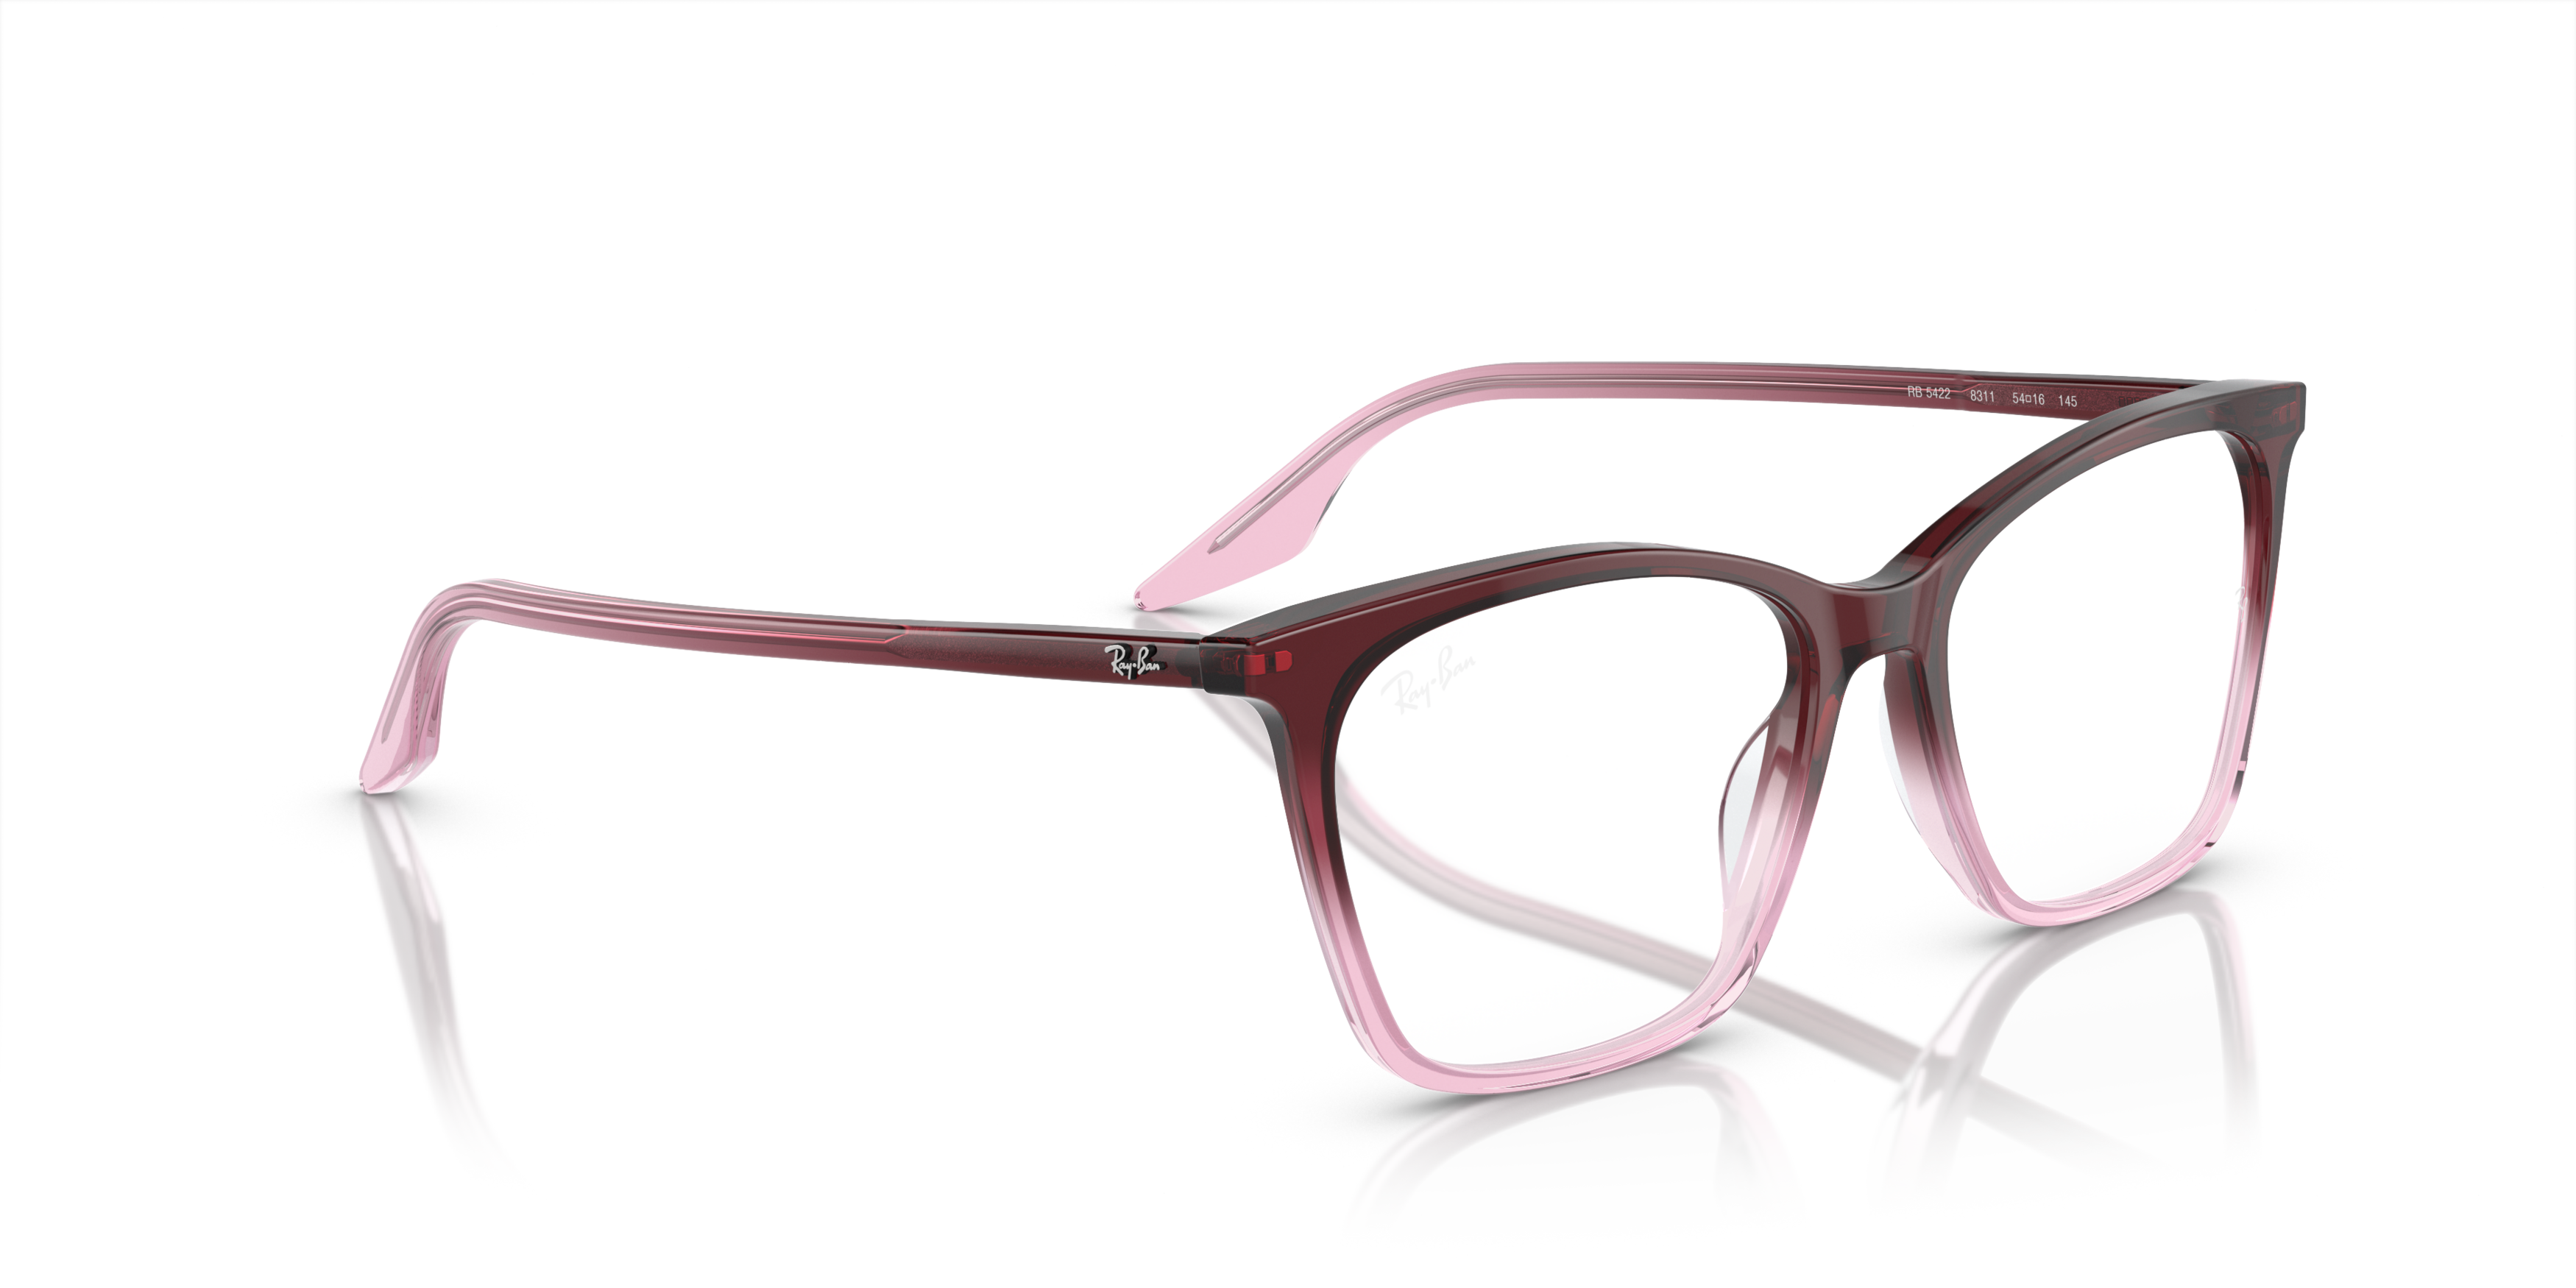 Angle_Right01 Ray-Ban RX 5422 Glasses Transparent / Red